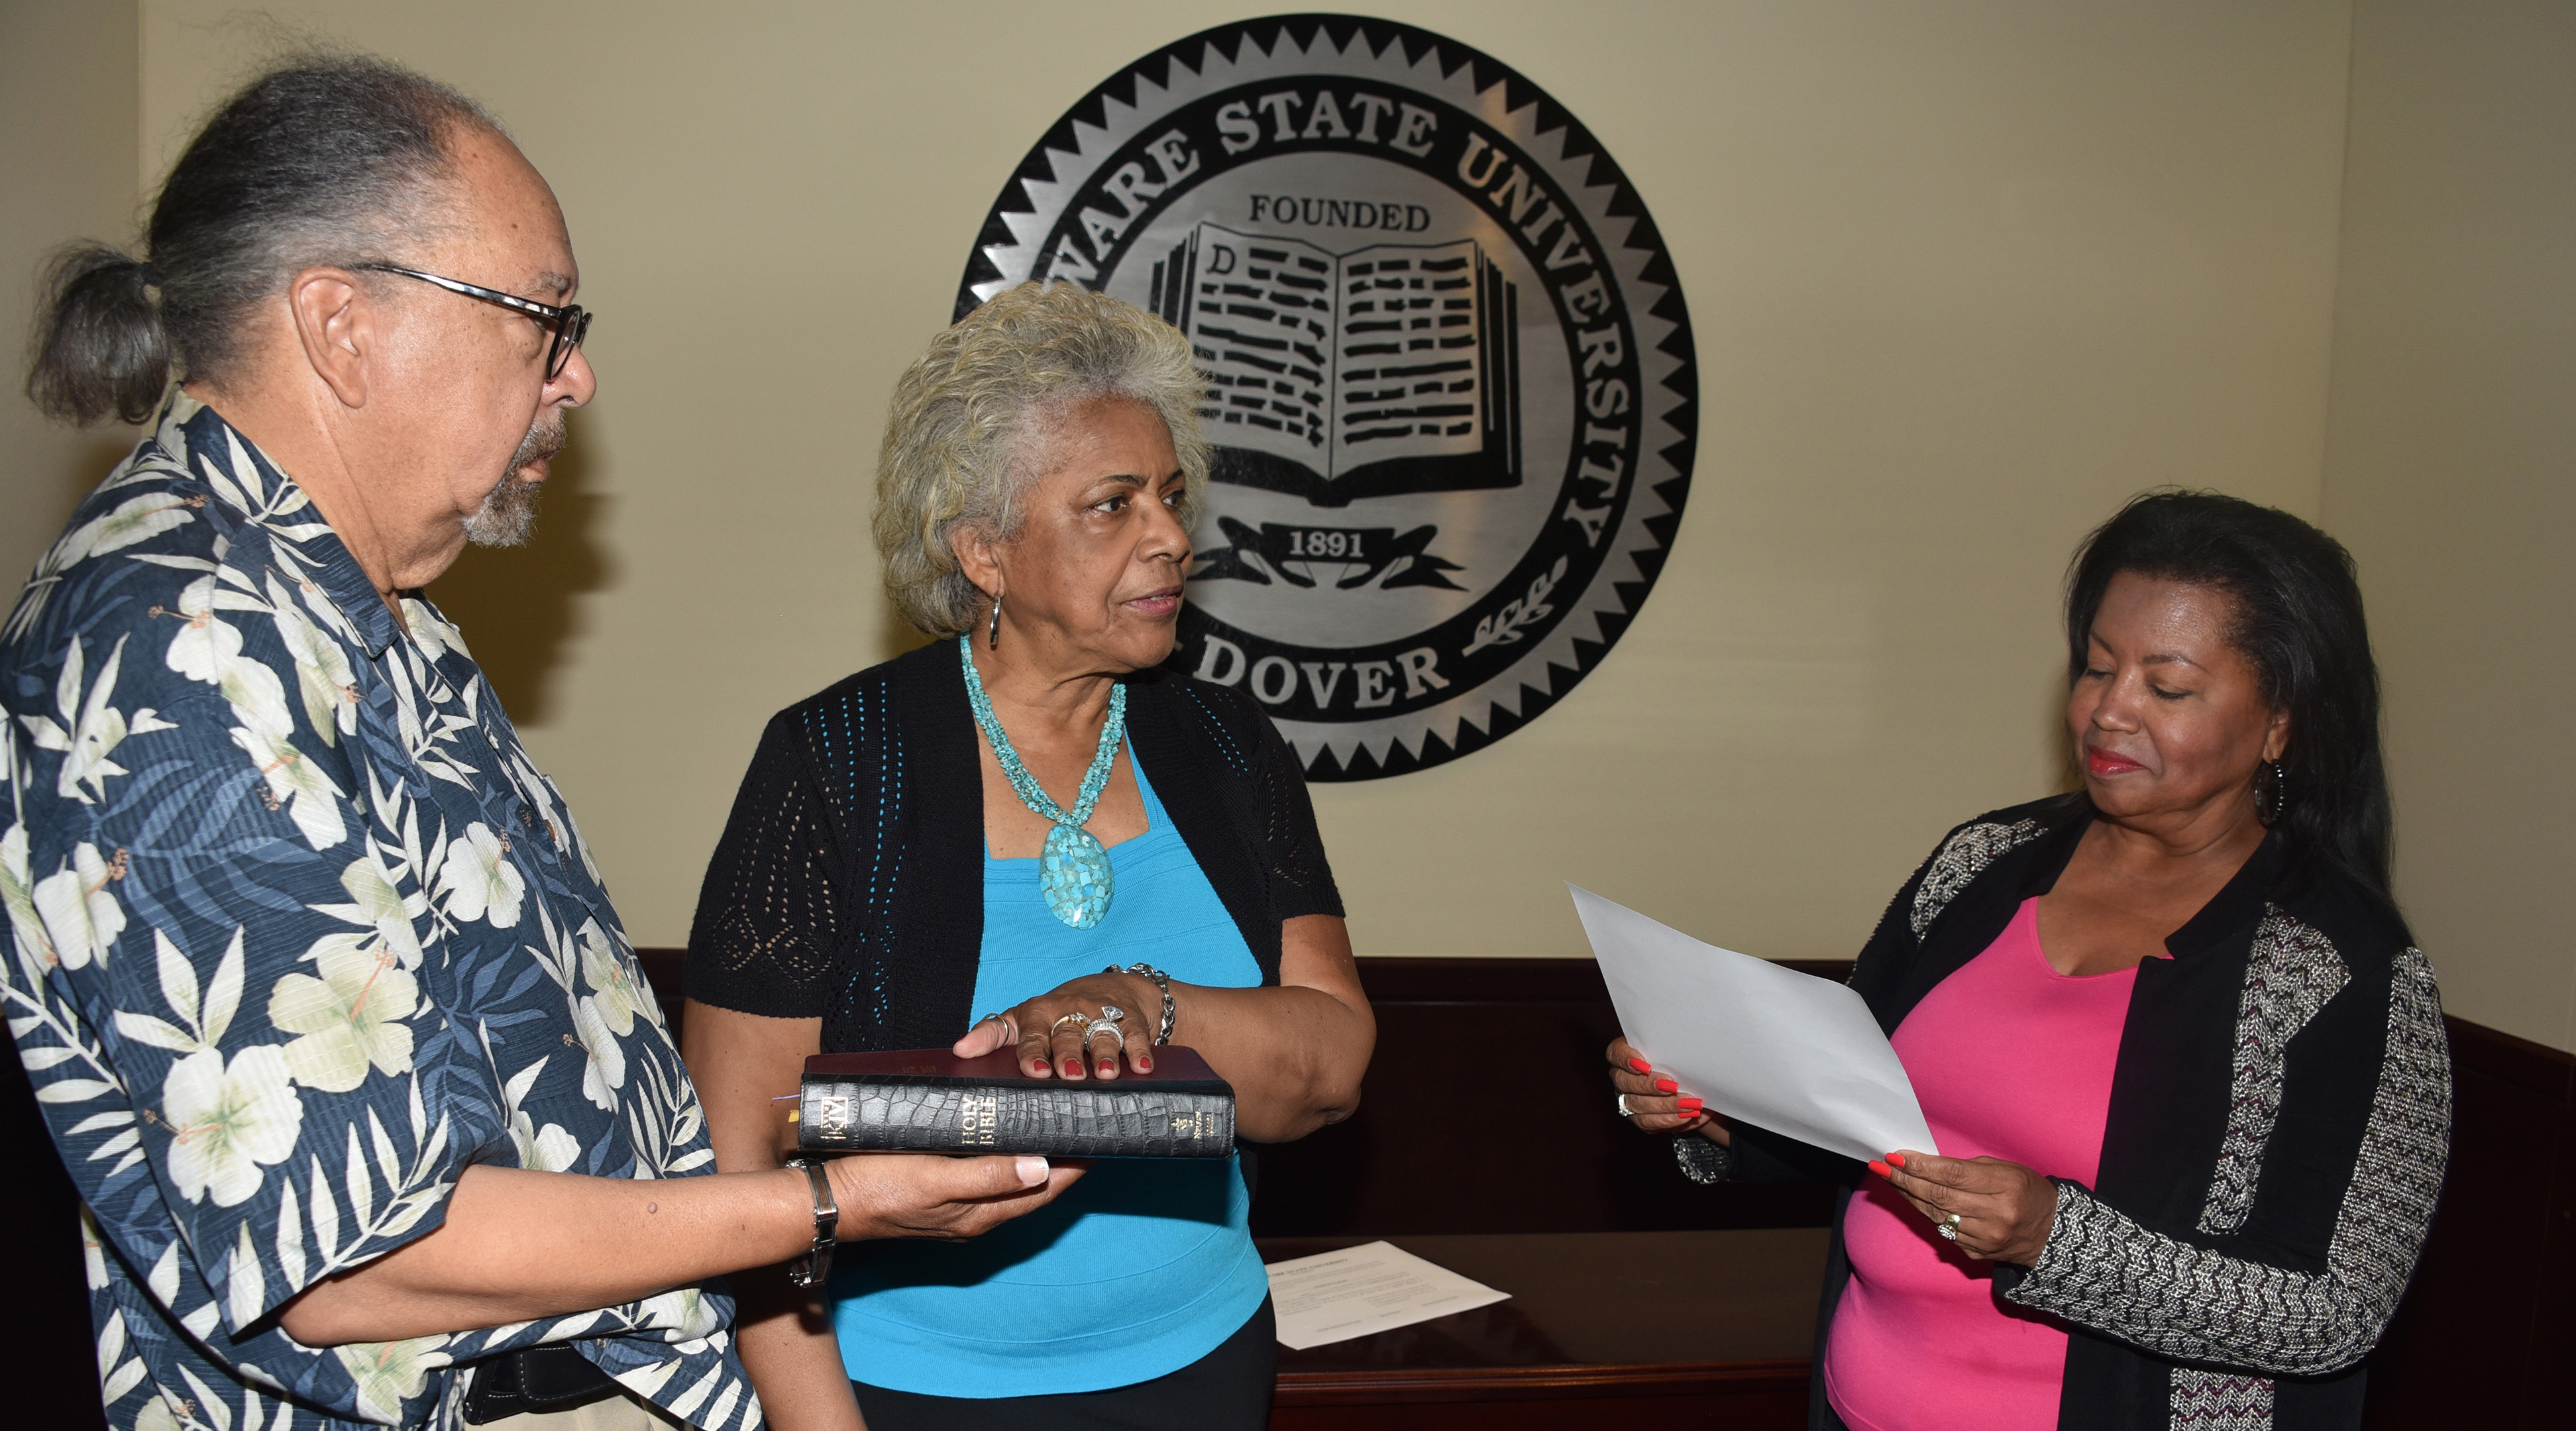 J. Cagney France, fiance of Esthelda Parker Selby, center, holds the bible as she is sworn in as a Board of Trustees member by Board Chairperson Devona Williams.